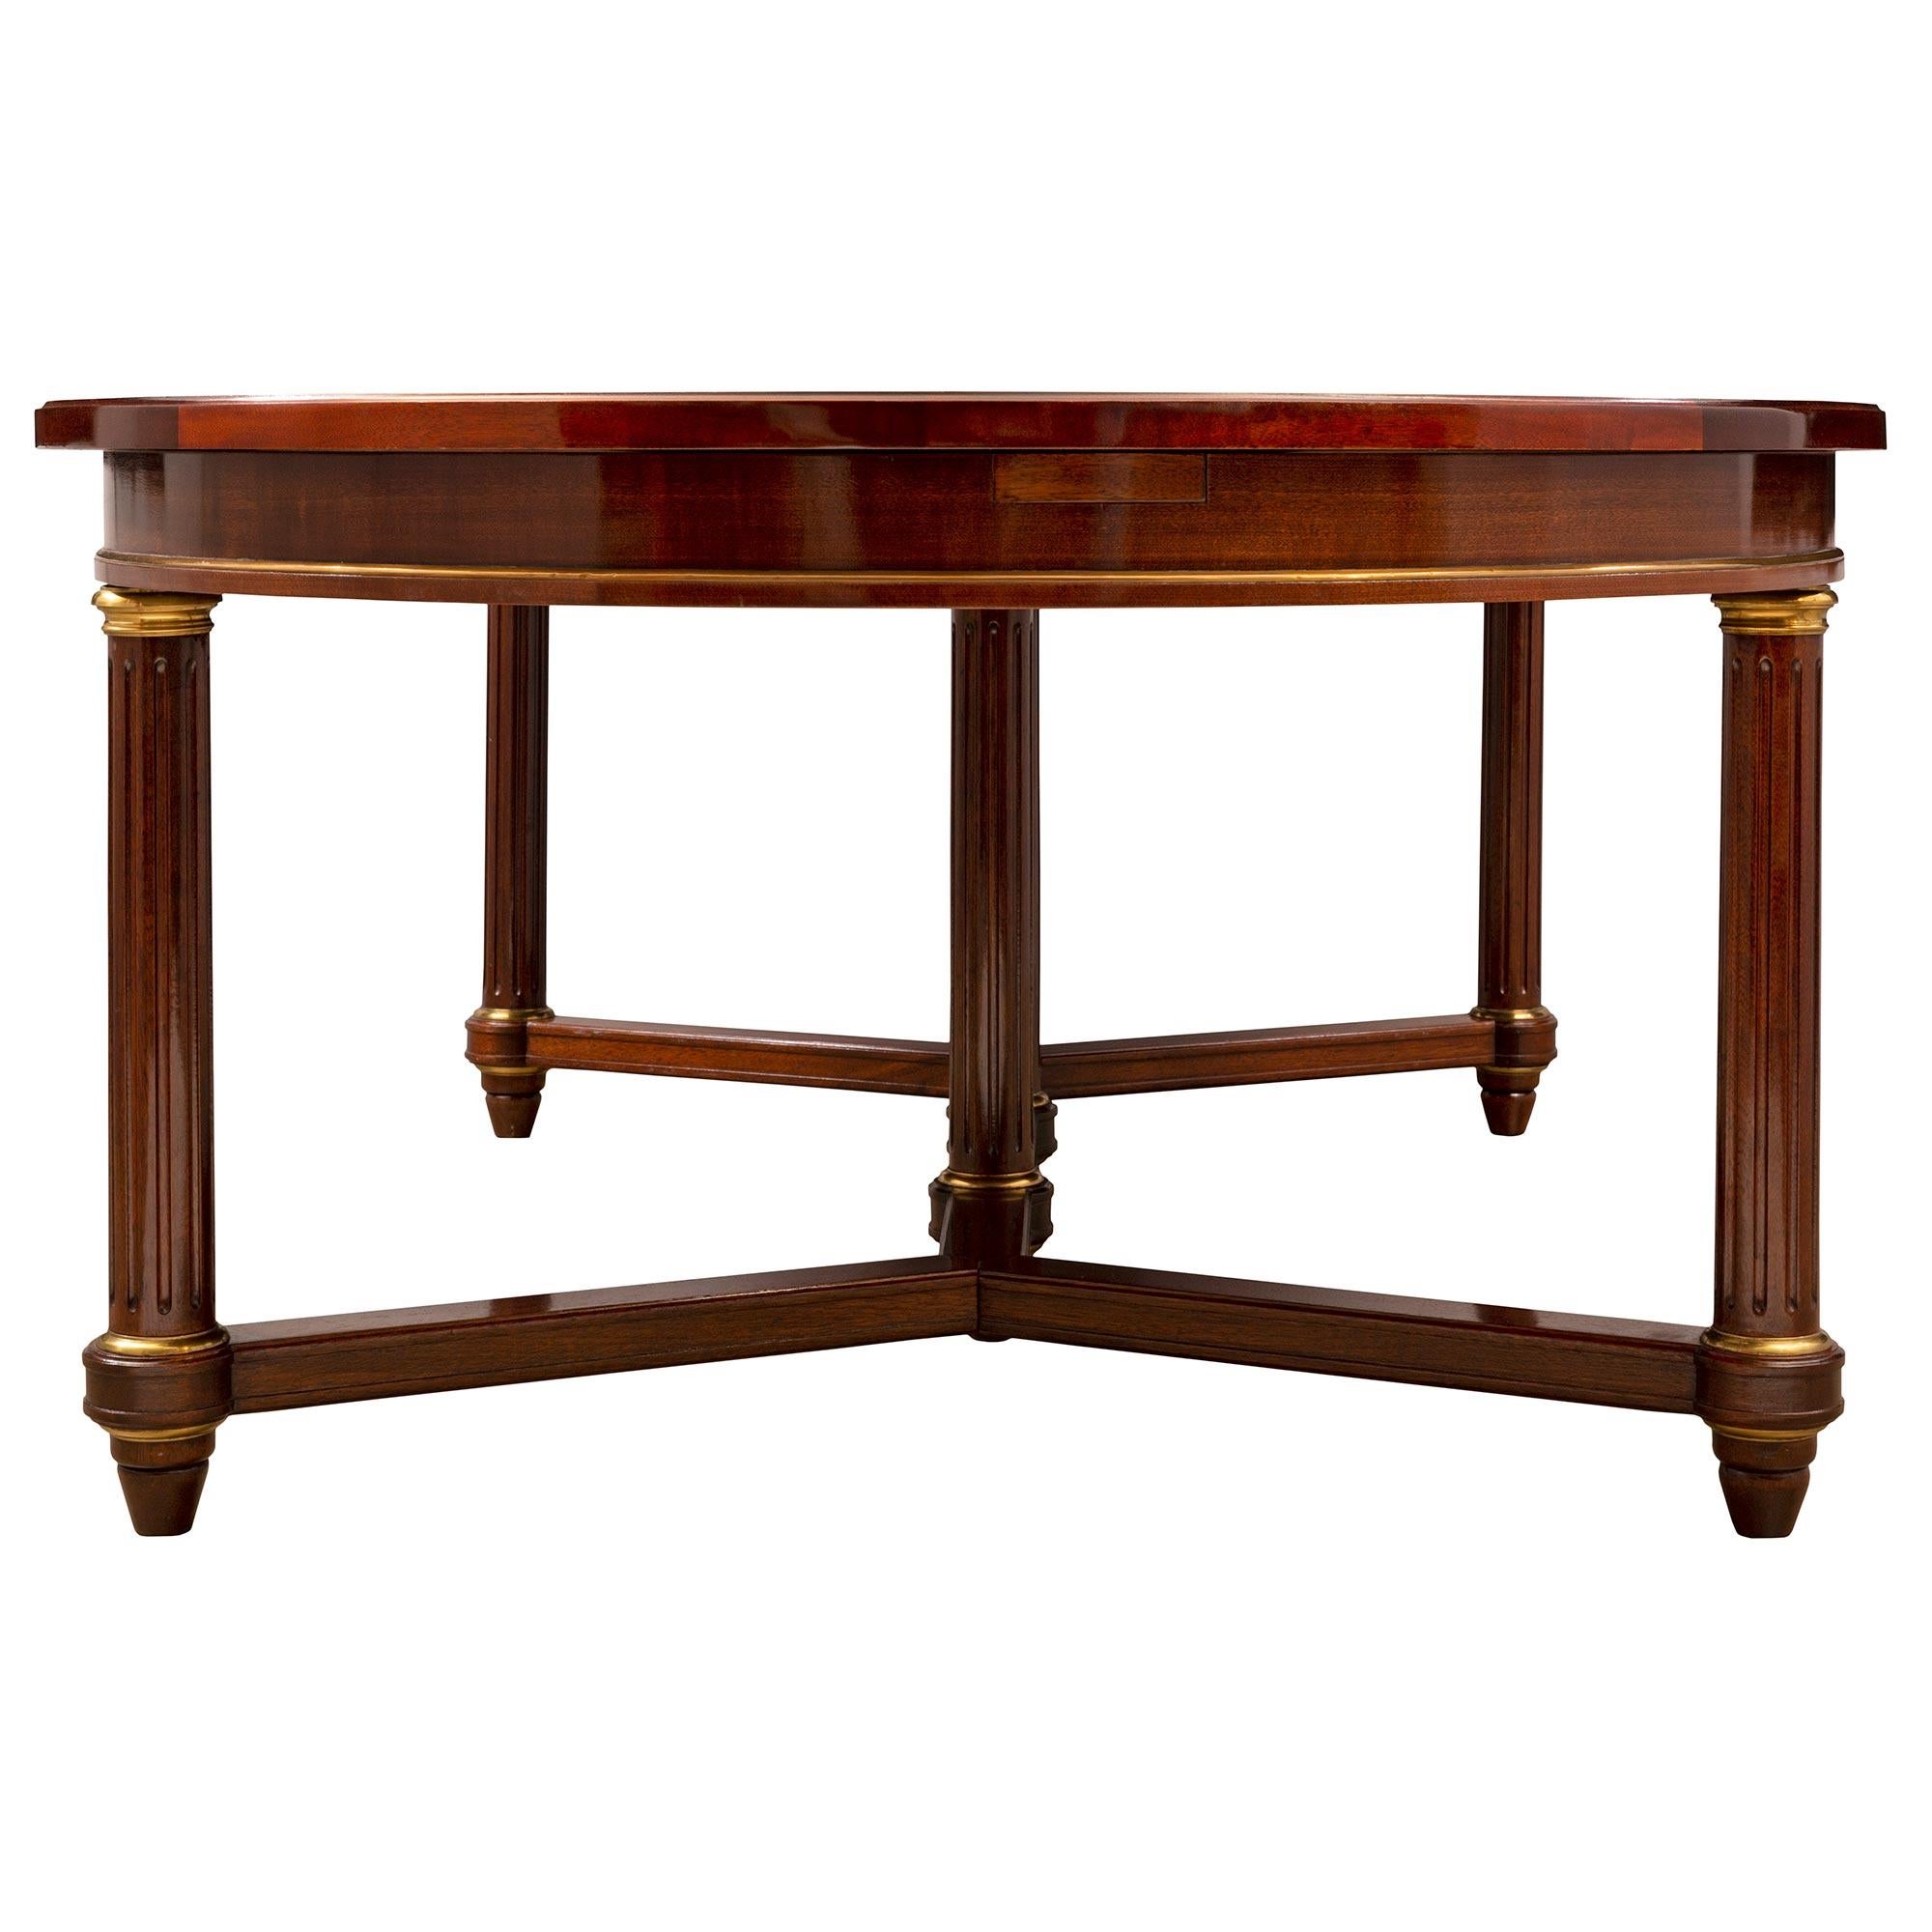 French Turn of the Century Empire St. Flamed Mahogany and Ormolu Dining Table For Sale 2